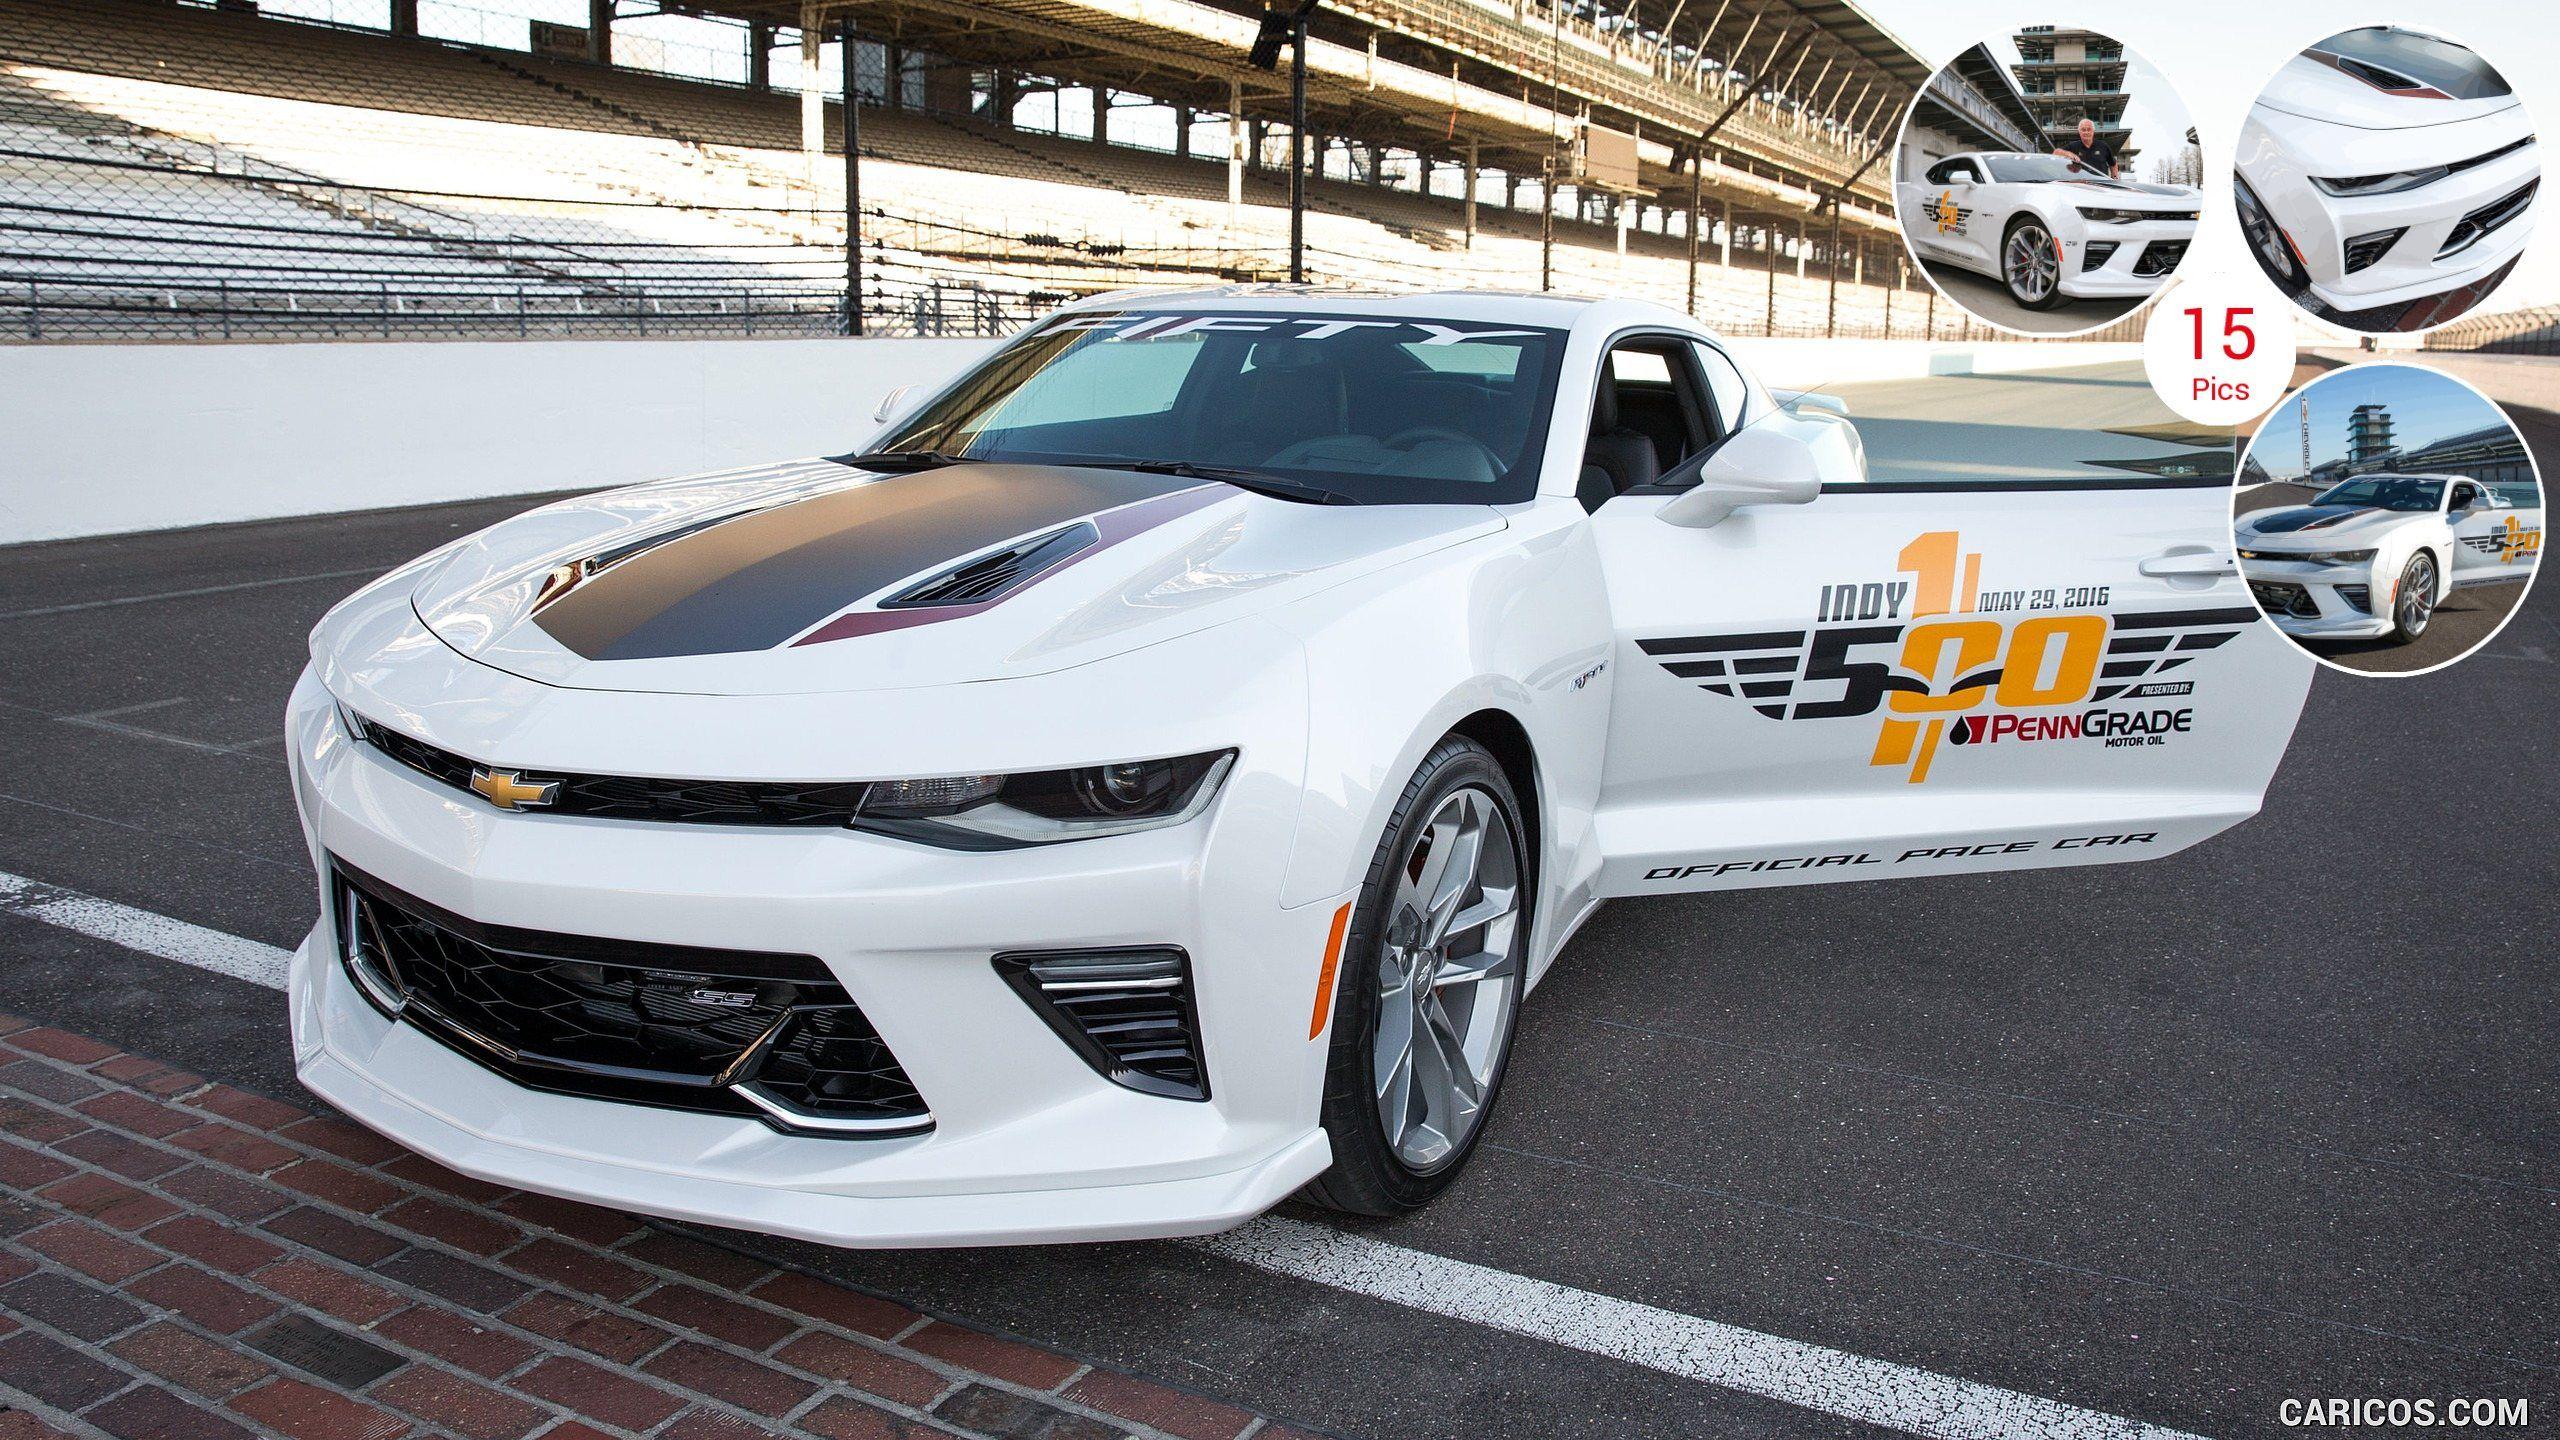 Chevrolet Camaro SS Indy 500 Pace Car 2017 50th Anniversary